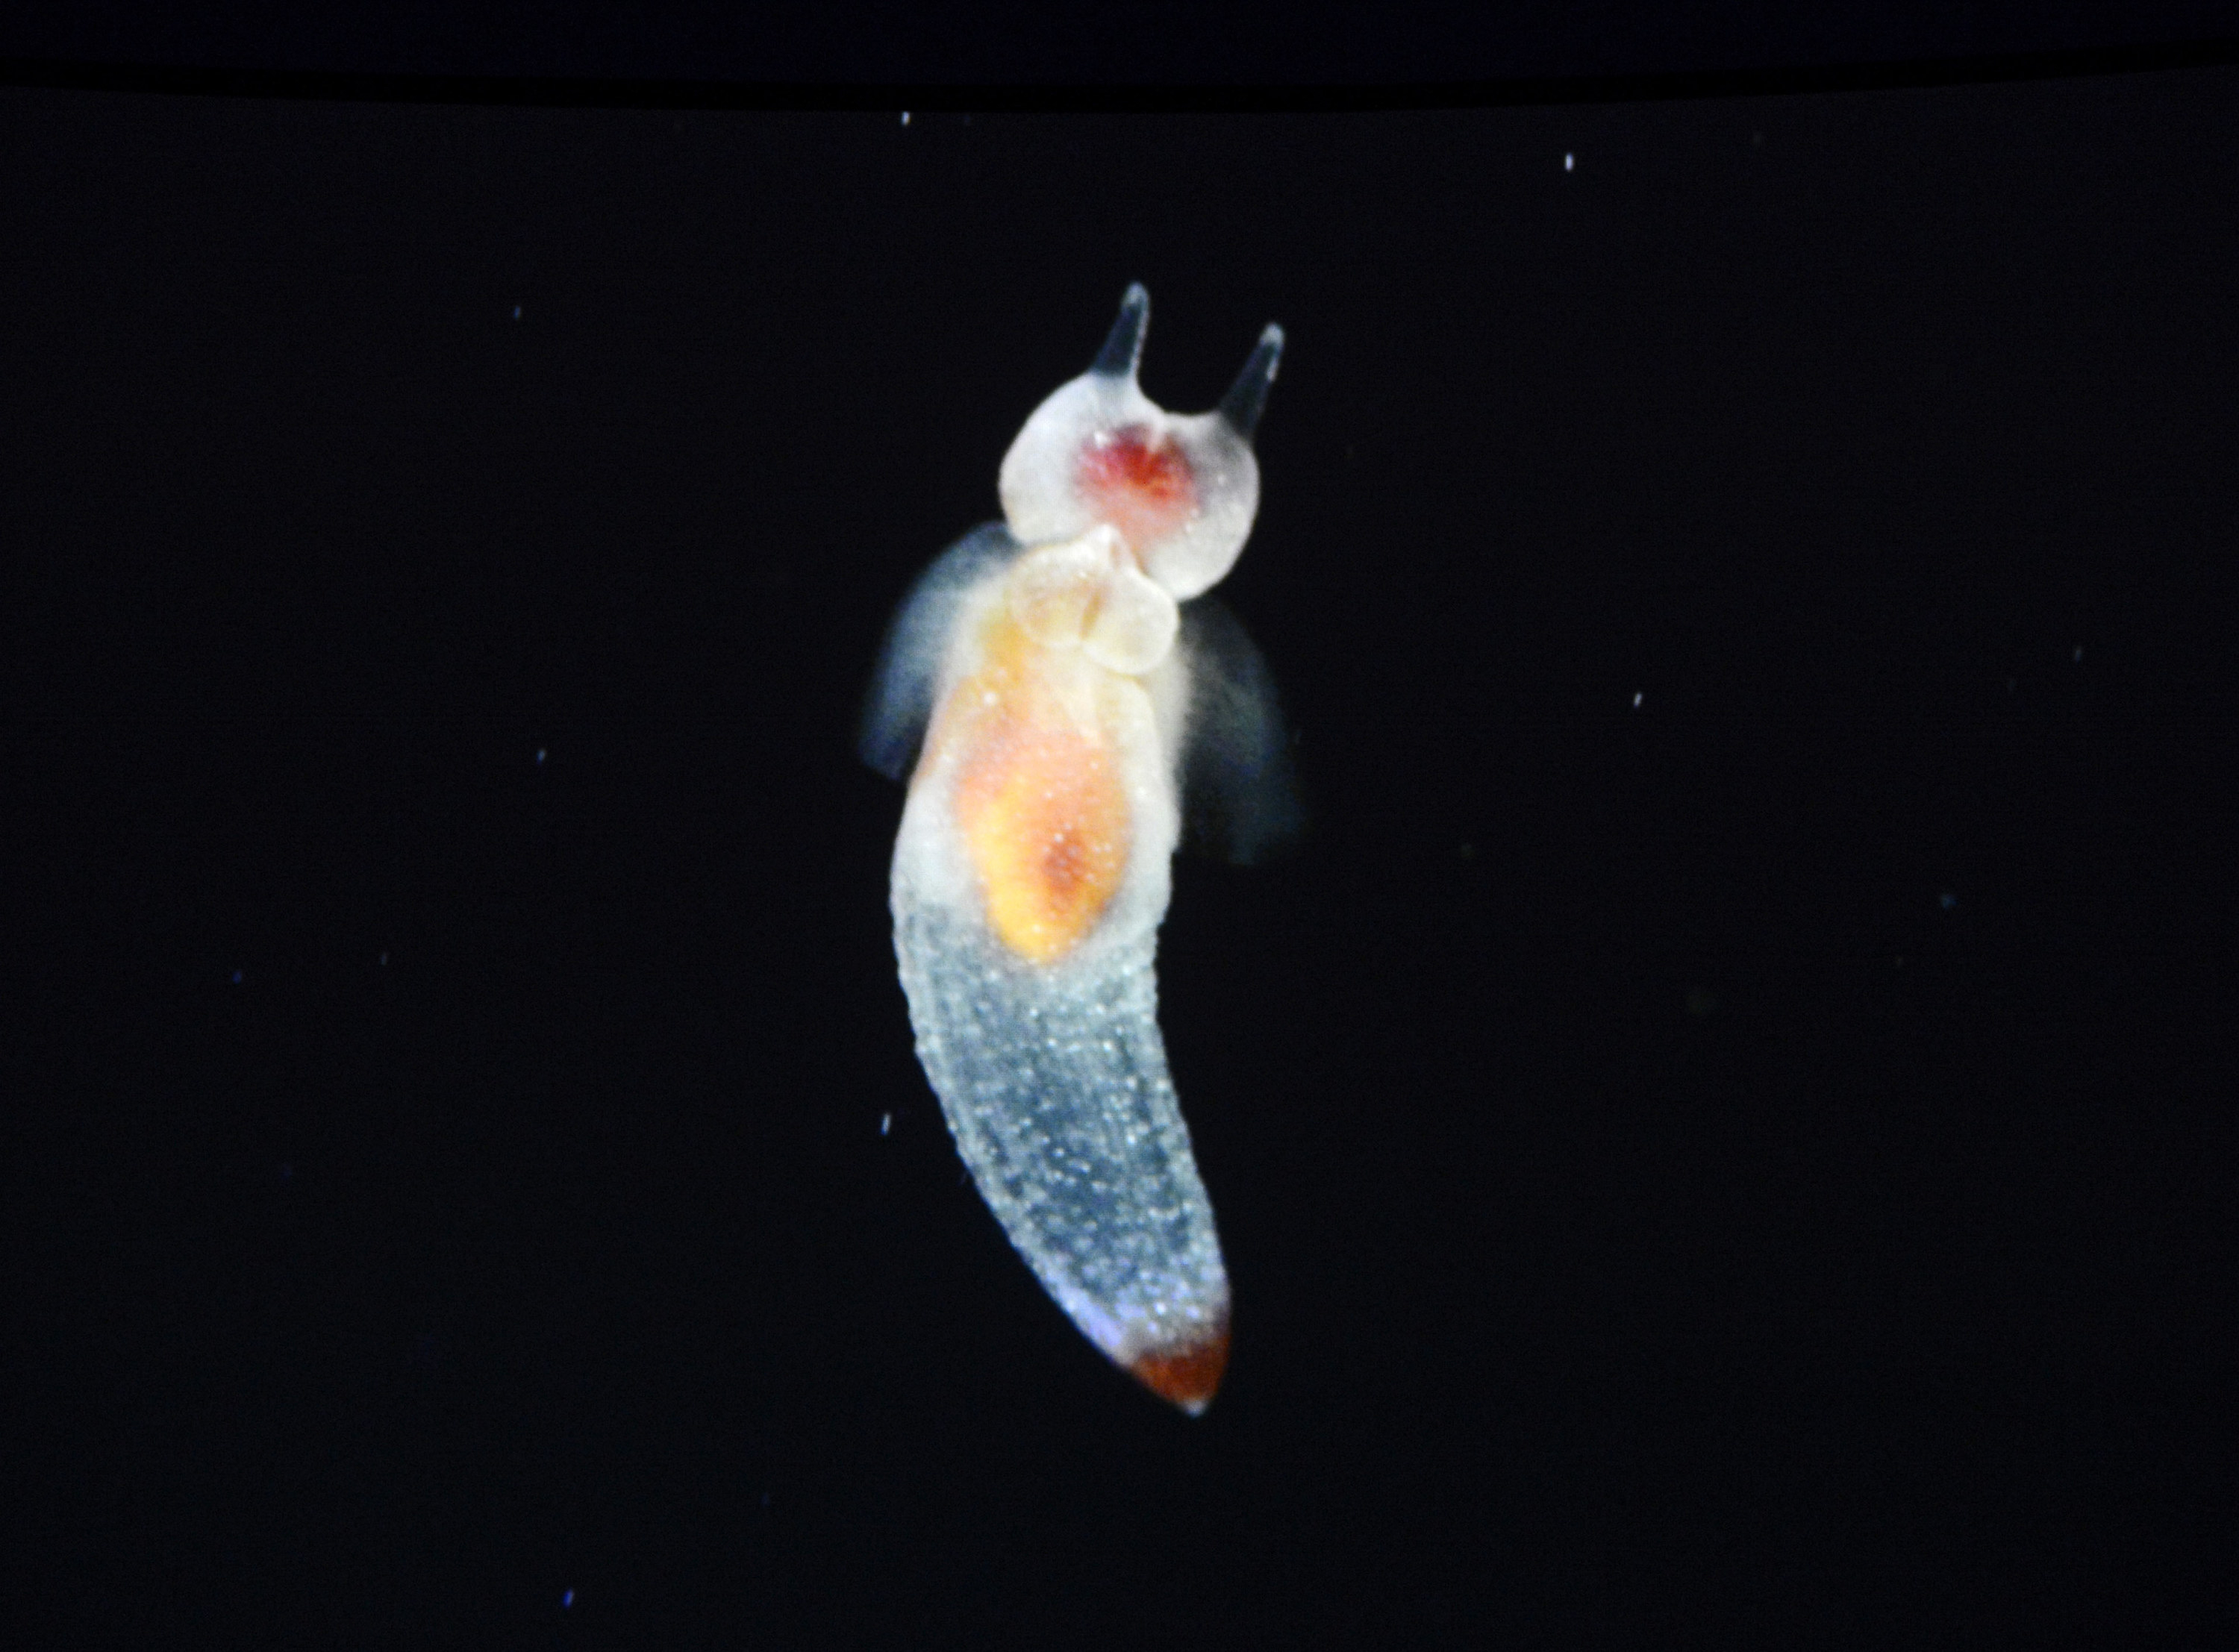 A Sea Angel swims in its tank at the Monterey Bay Aquarium&#x27;s new &quot;Into the Deep: Exploring Our Undiscovered Ocean&quot; exhibit in Monterey, Calif., on Monday, March 21, 2022